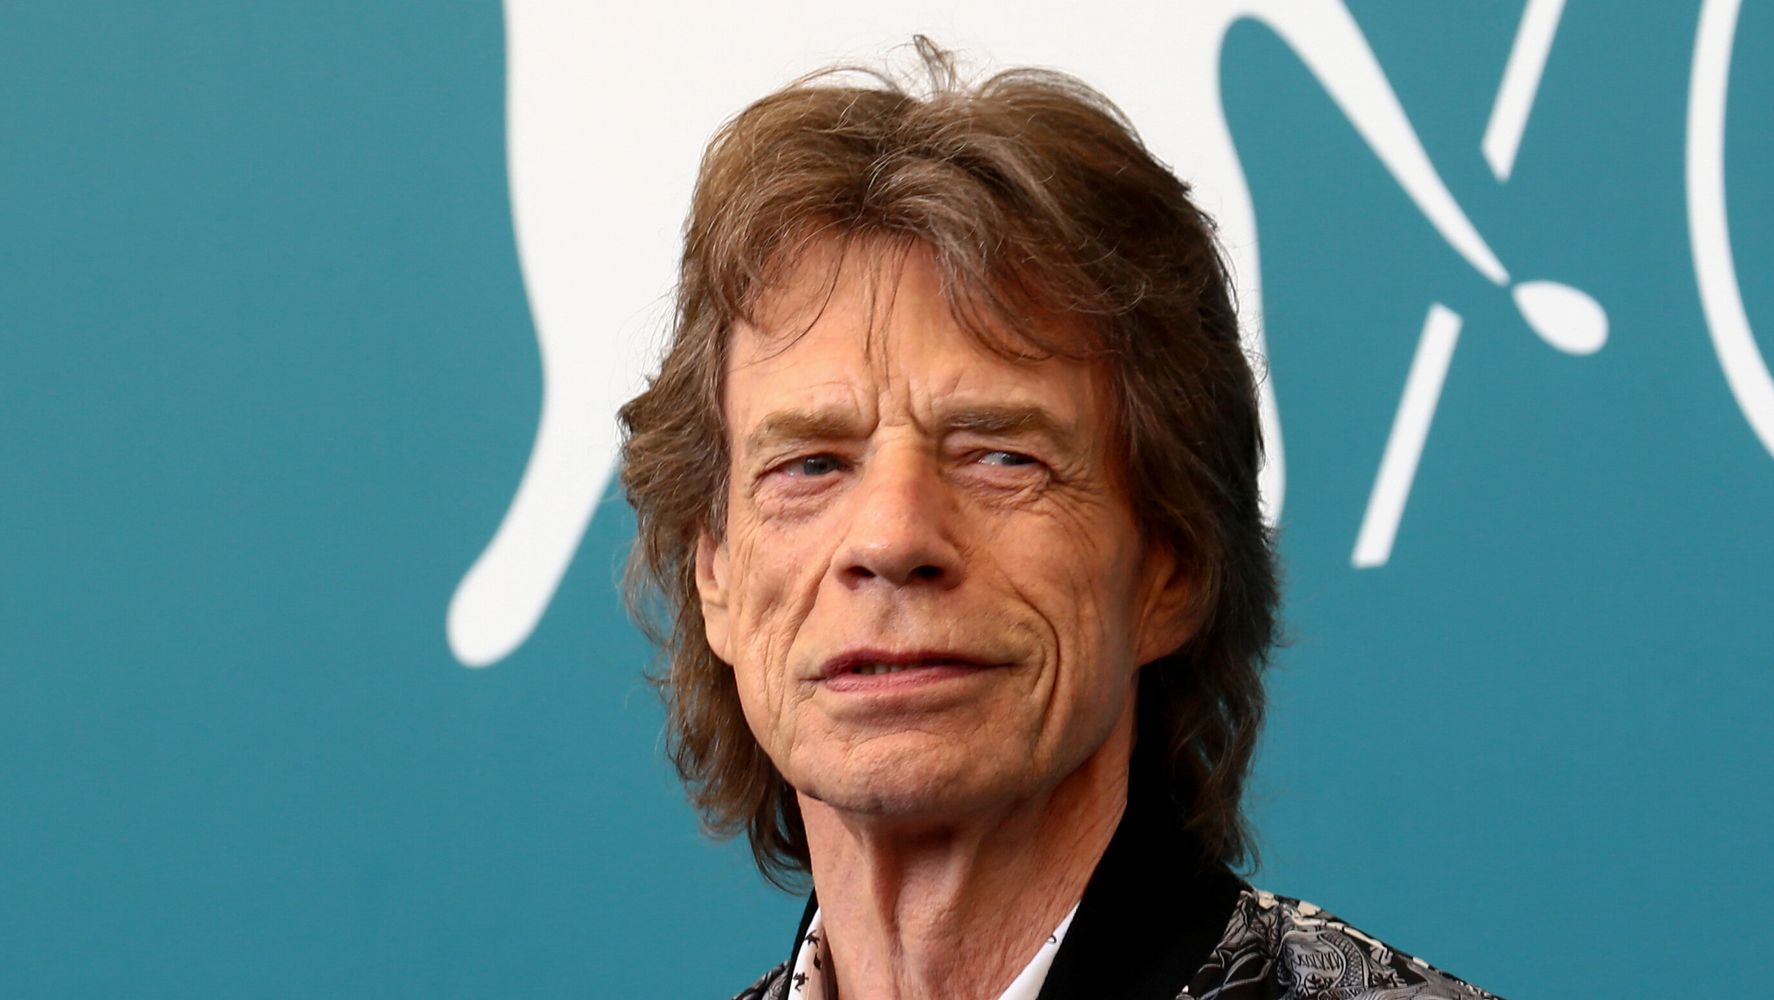 Mick Jagger nails problem with anti-Vaxxers: ‘Rational thinking does not work’